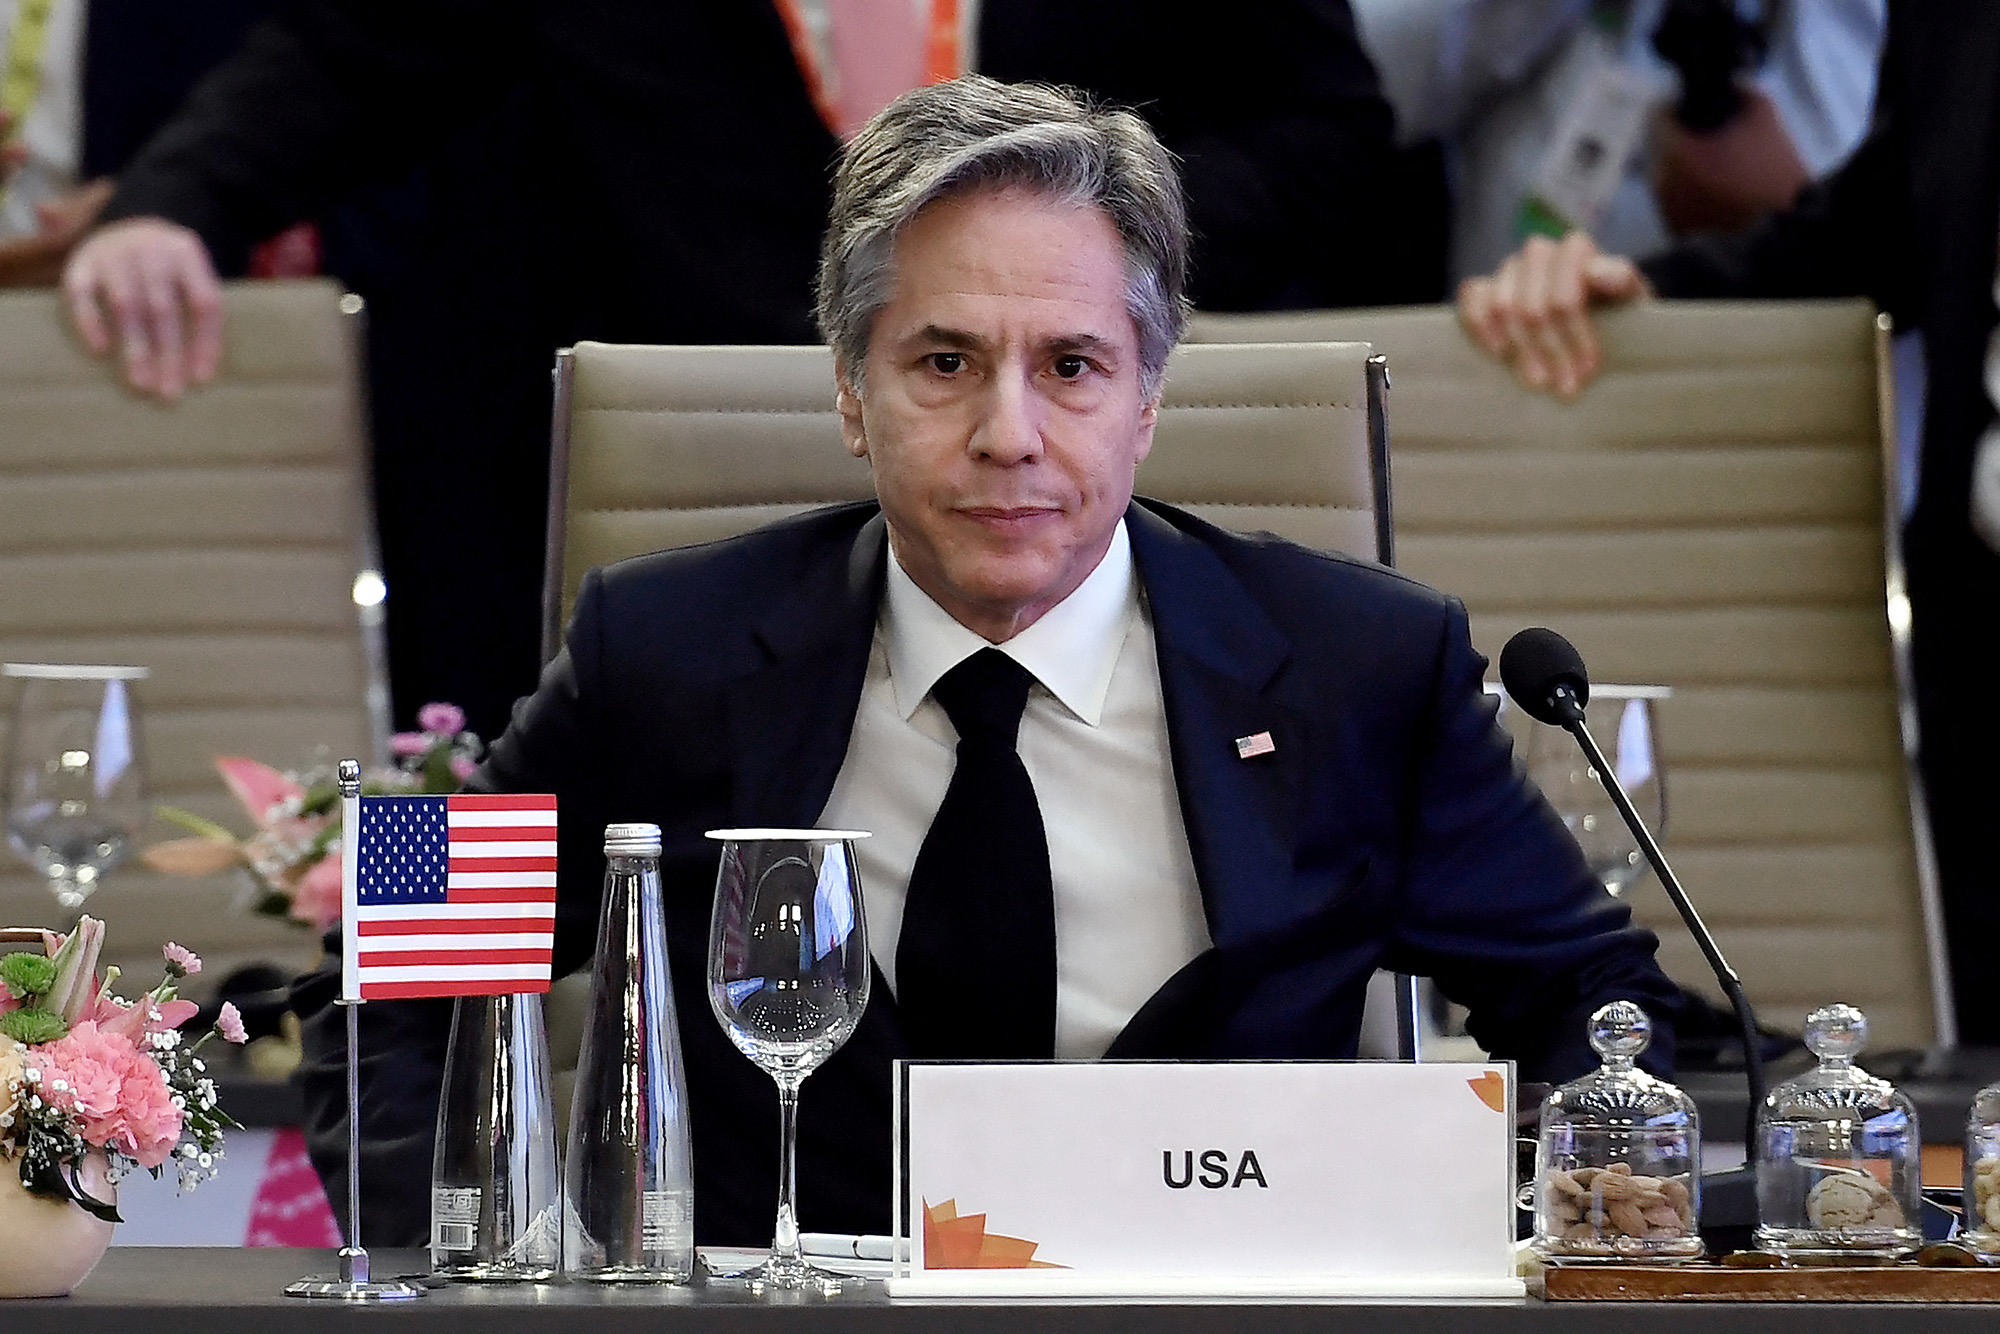 U.S Secretary of State Antony Blinken attends the G20 foreign ministers' meeting in New Delhi, India, on March 2.